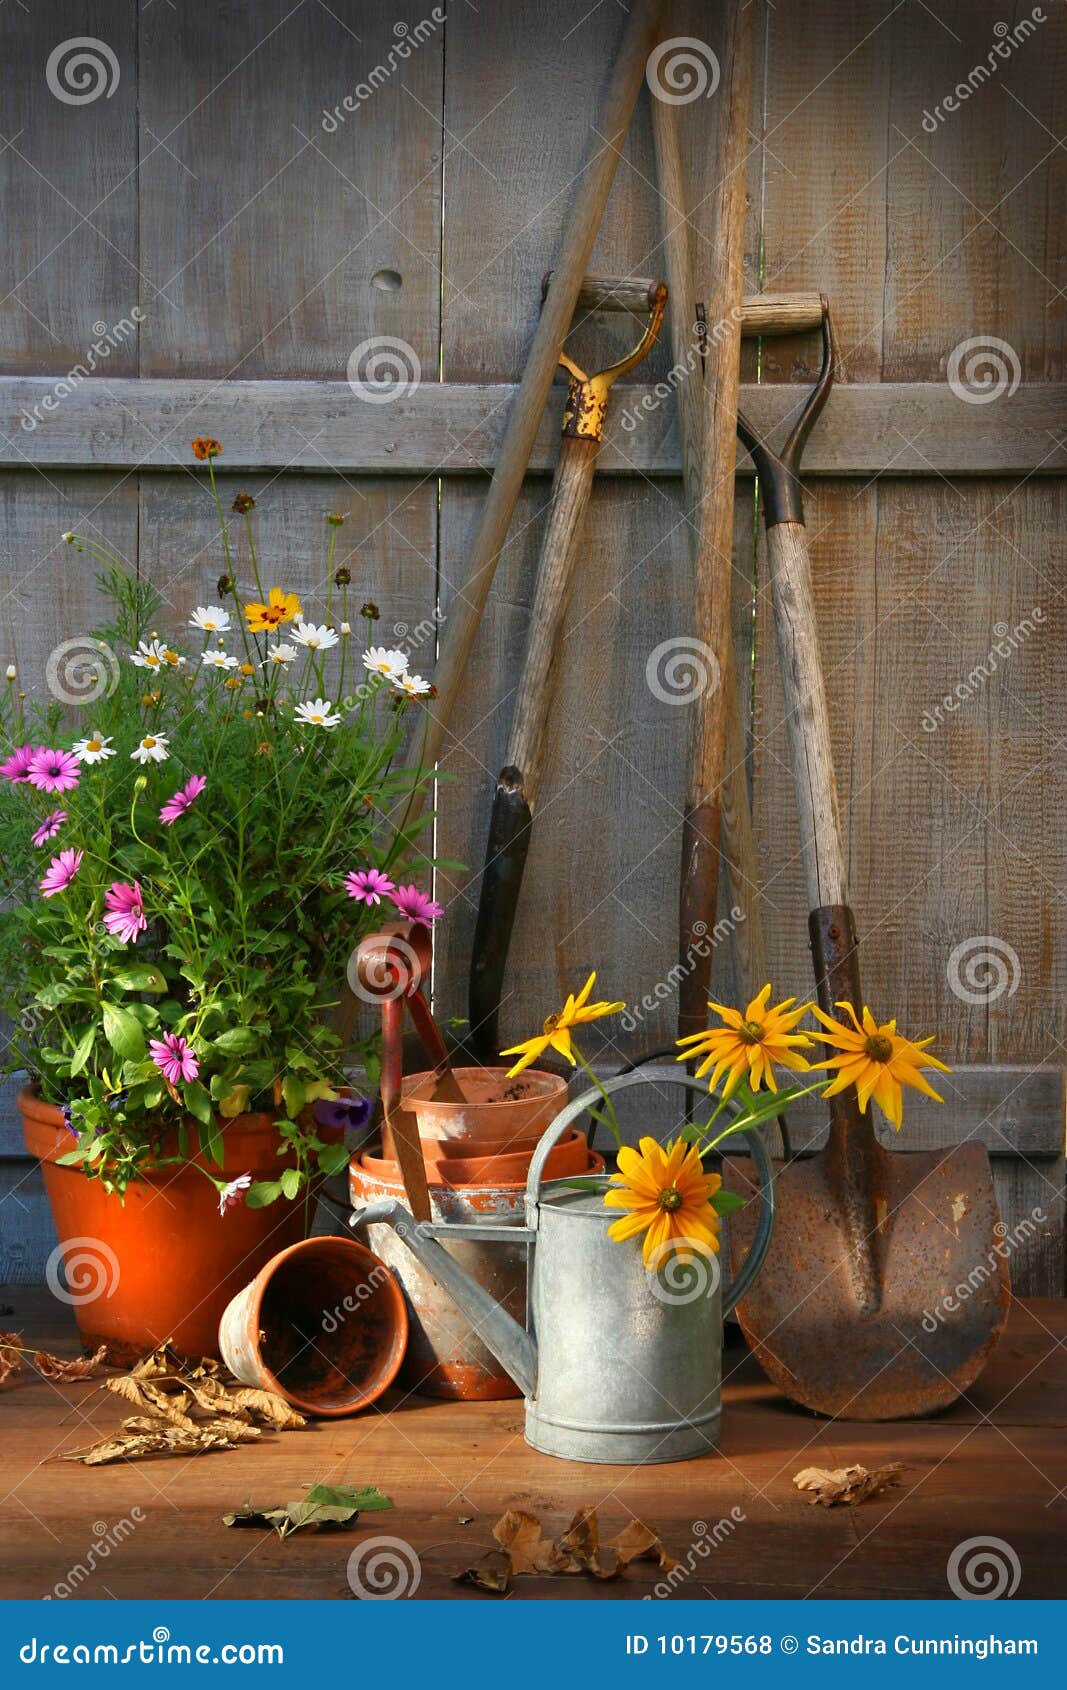 garden shed with tools and pots